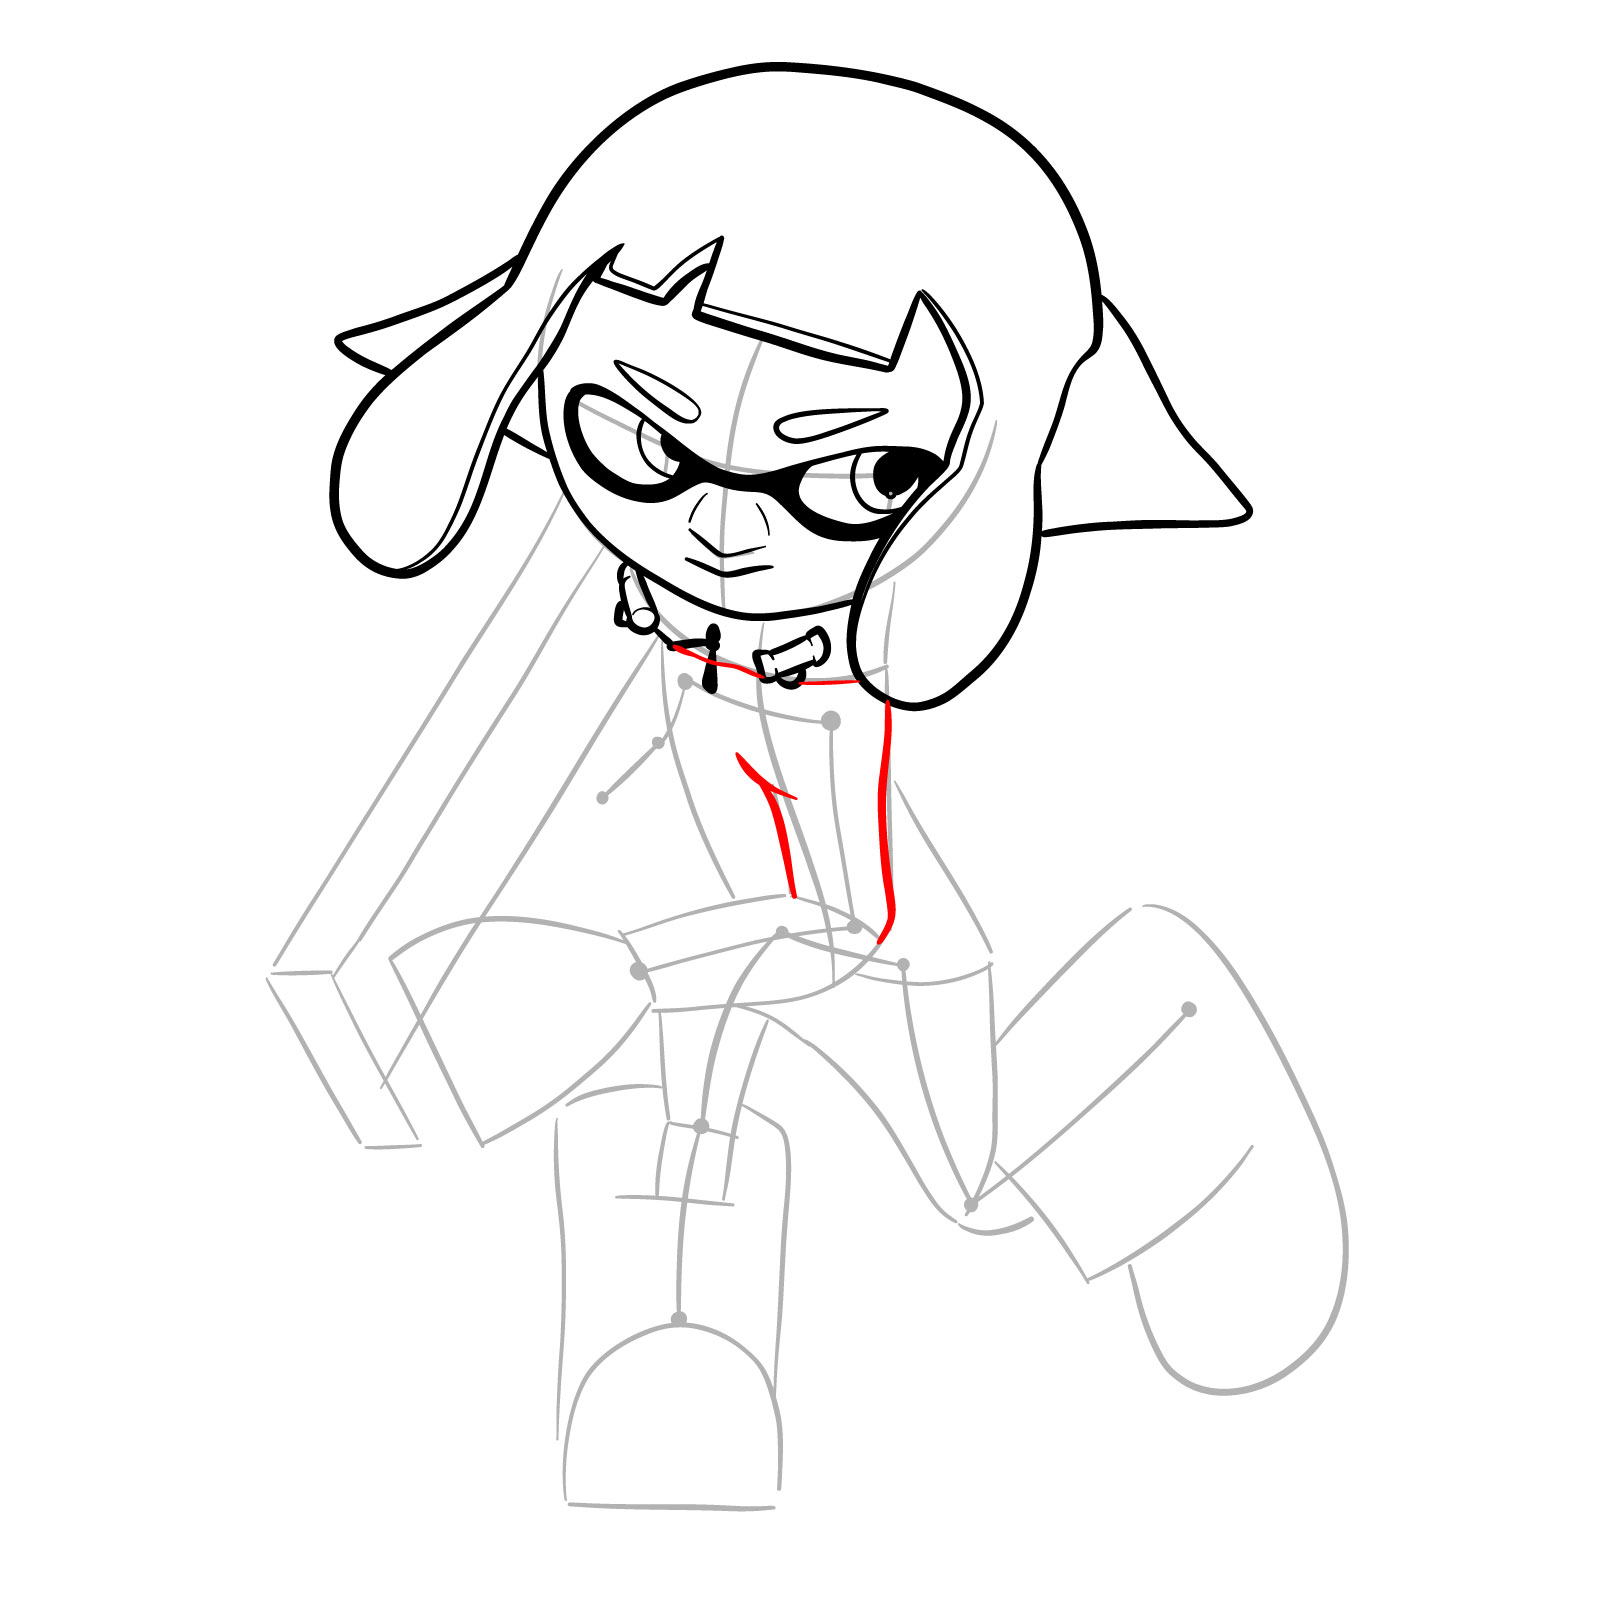 How to draw a Splatoon Agent 4 - step 13